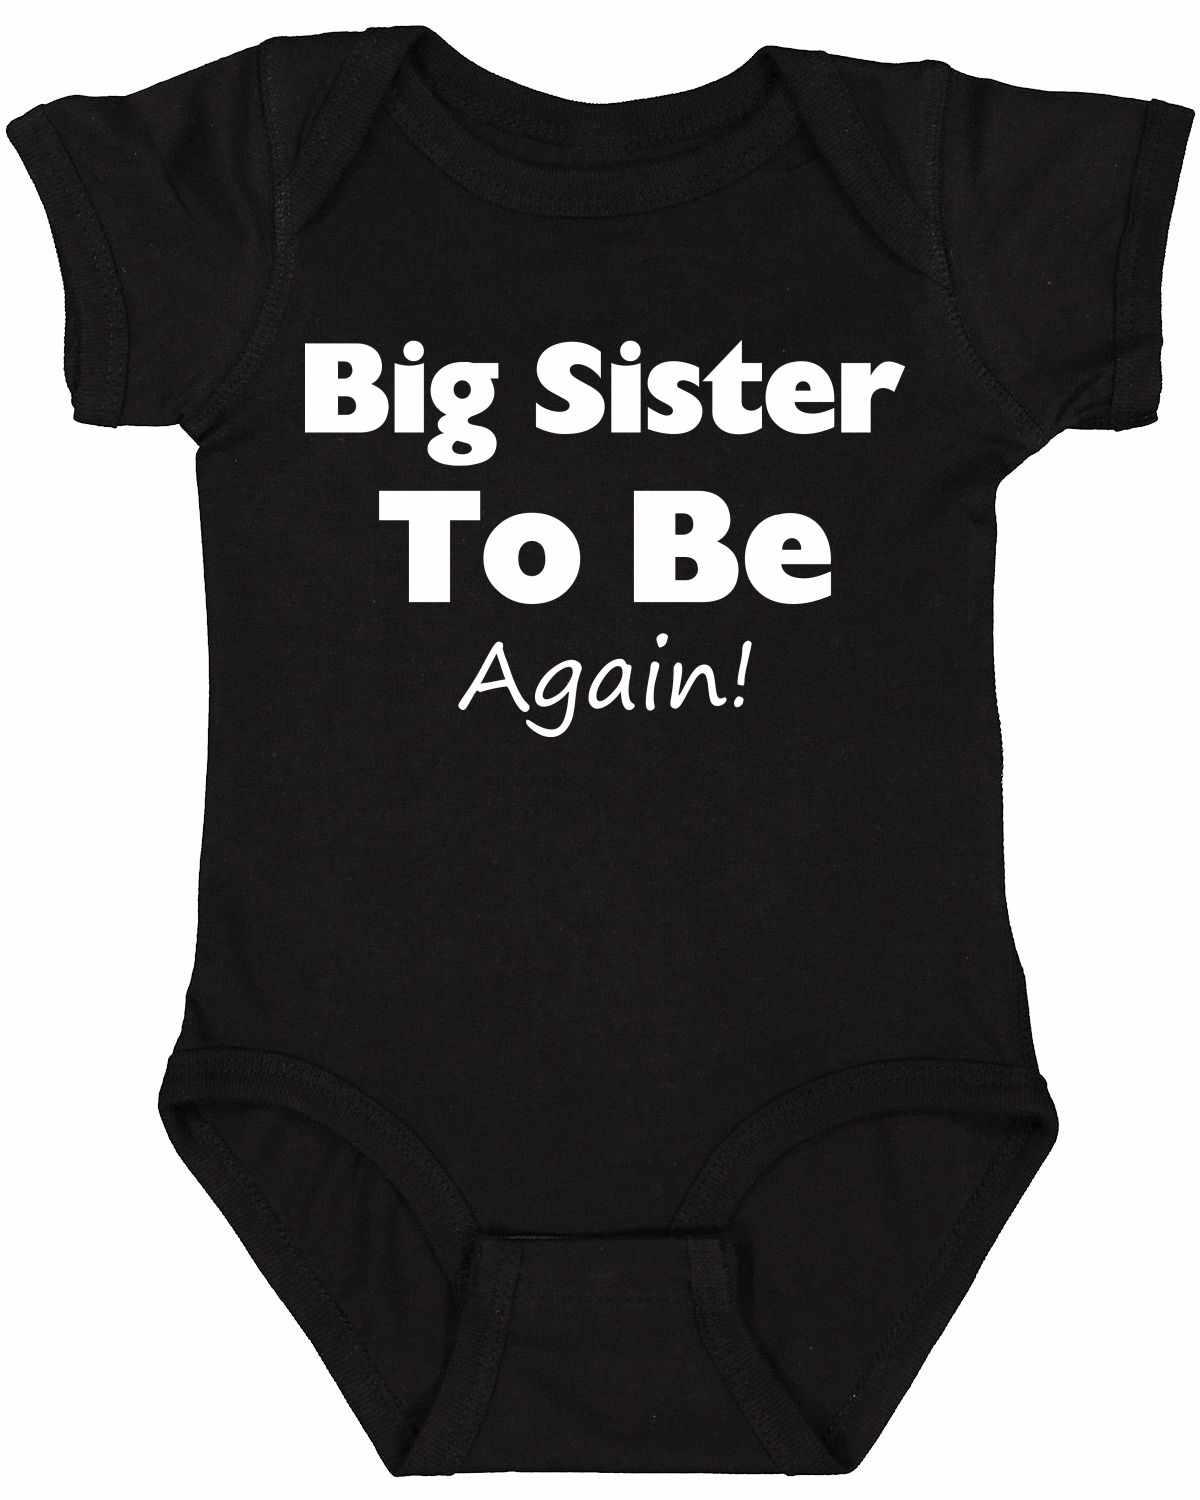 Big Sister To Be Again on Infant BodySuit